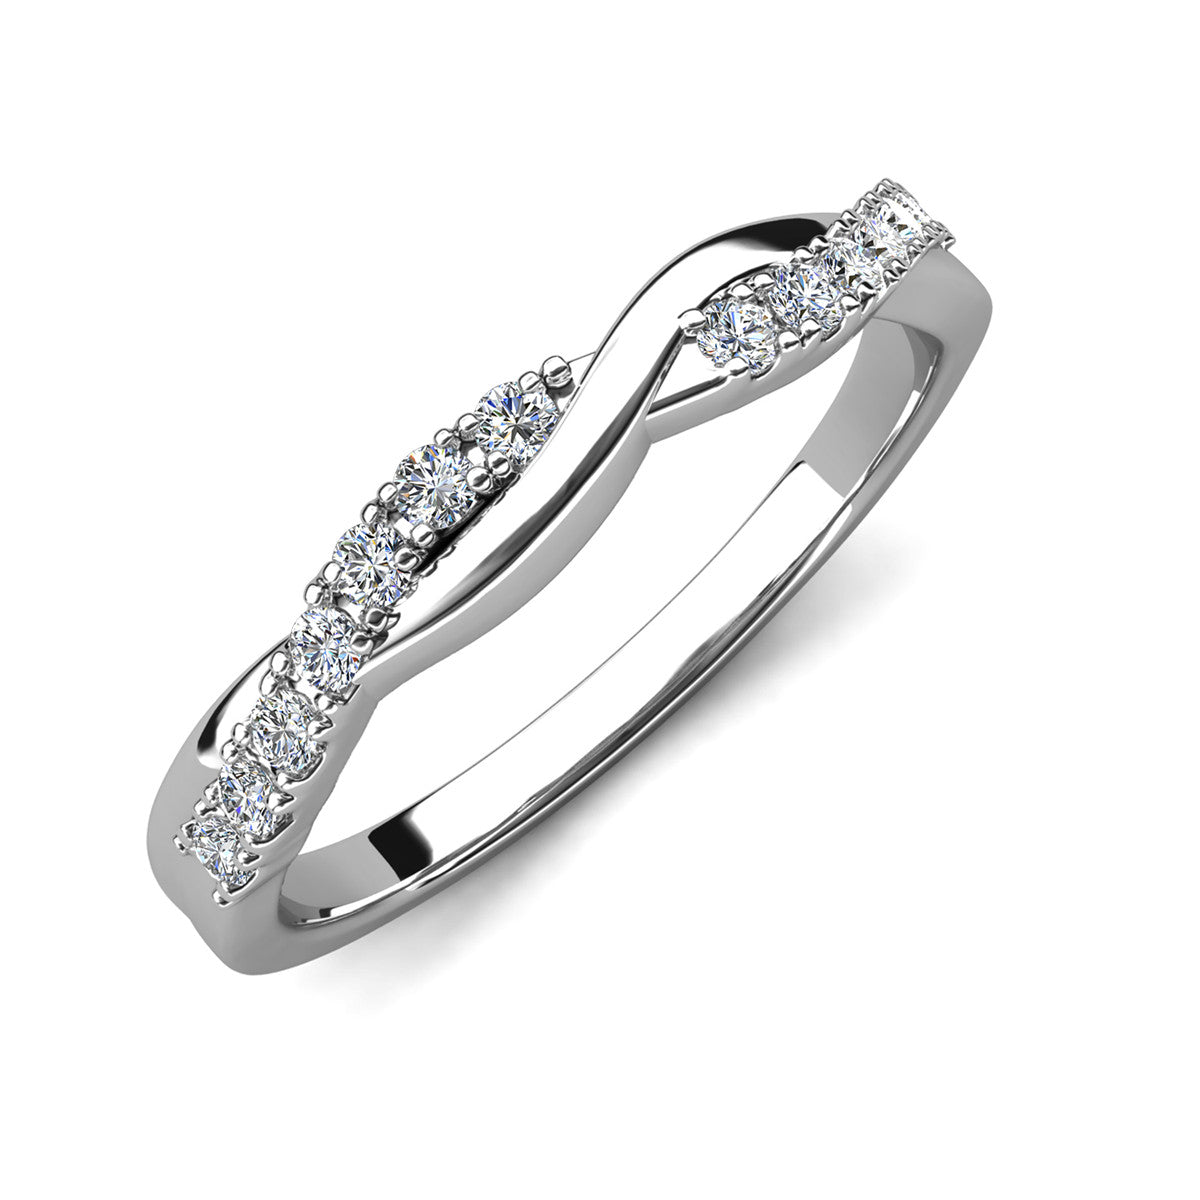 Moissanite by Cate & Chloe Avery Sterling Silver Ring with Moissanite and 5A Cubic Zirconia Crystals